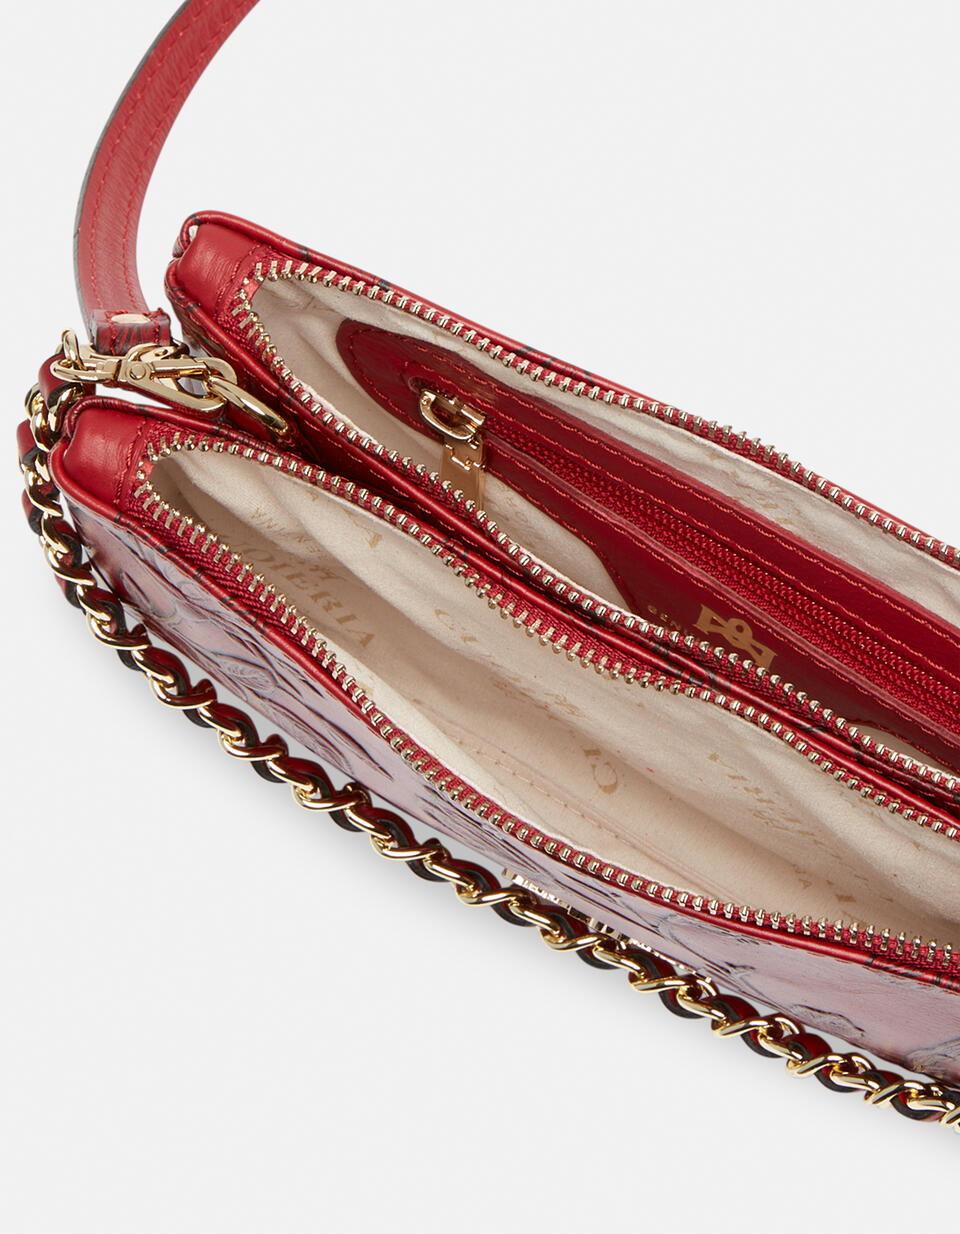 Double clutch bag in rose embossed printed leather - Crossbody Bags - WOMEN'S BAGS | bags Mimì ROSSO - Crossbody Bags - WOMEN'S BAGS | bagsCuoieria Fiorentina